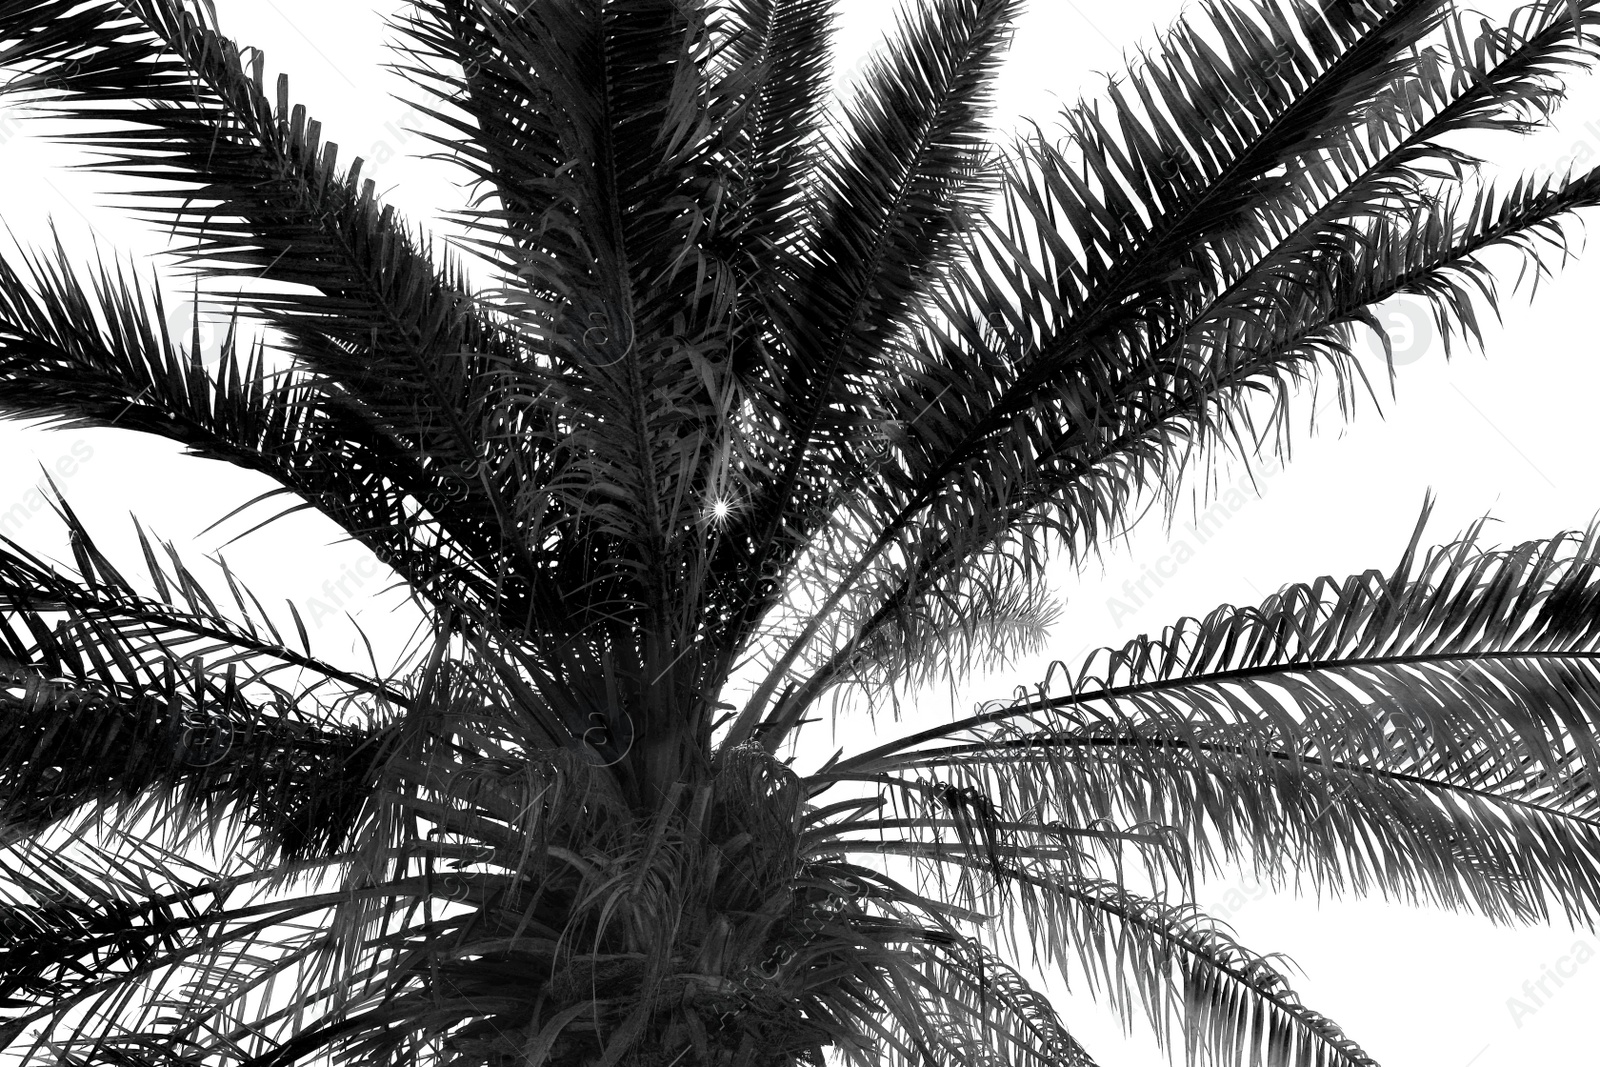 Image of Palm with lush leaves, low angle view. Black and white tone